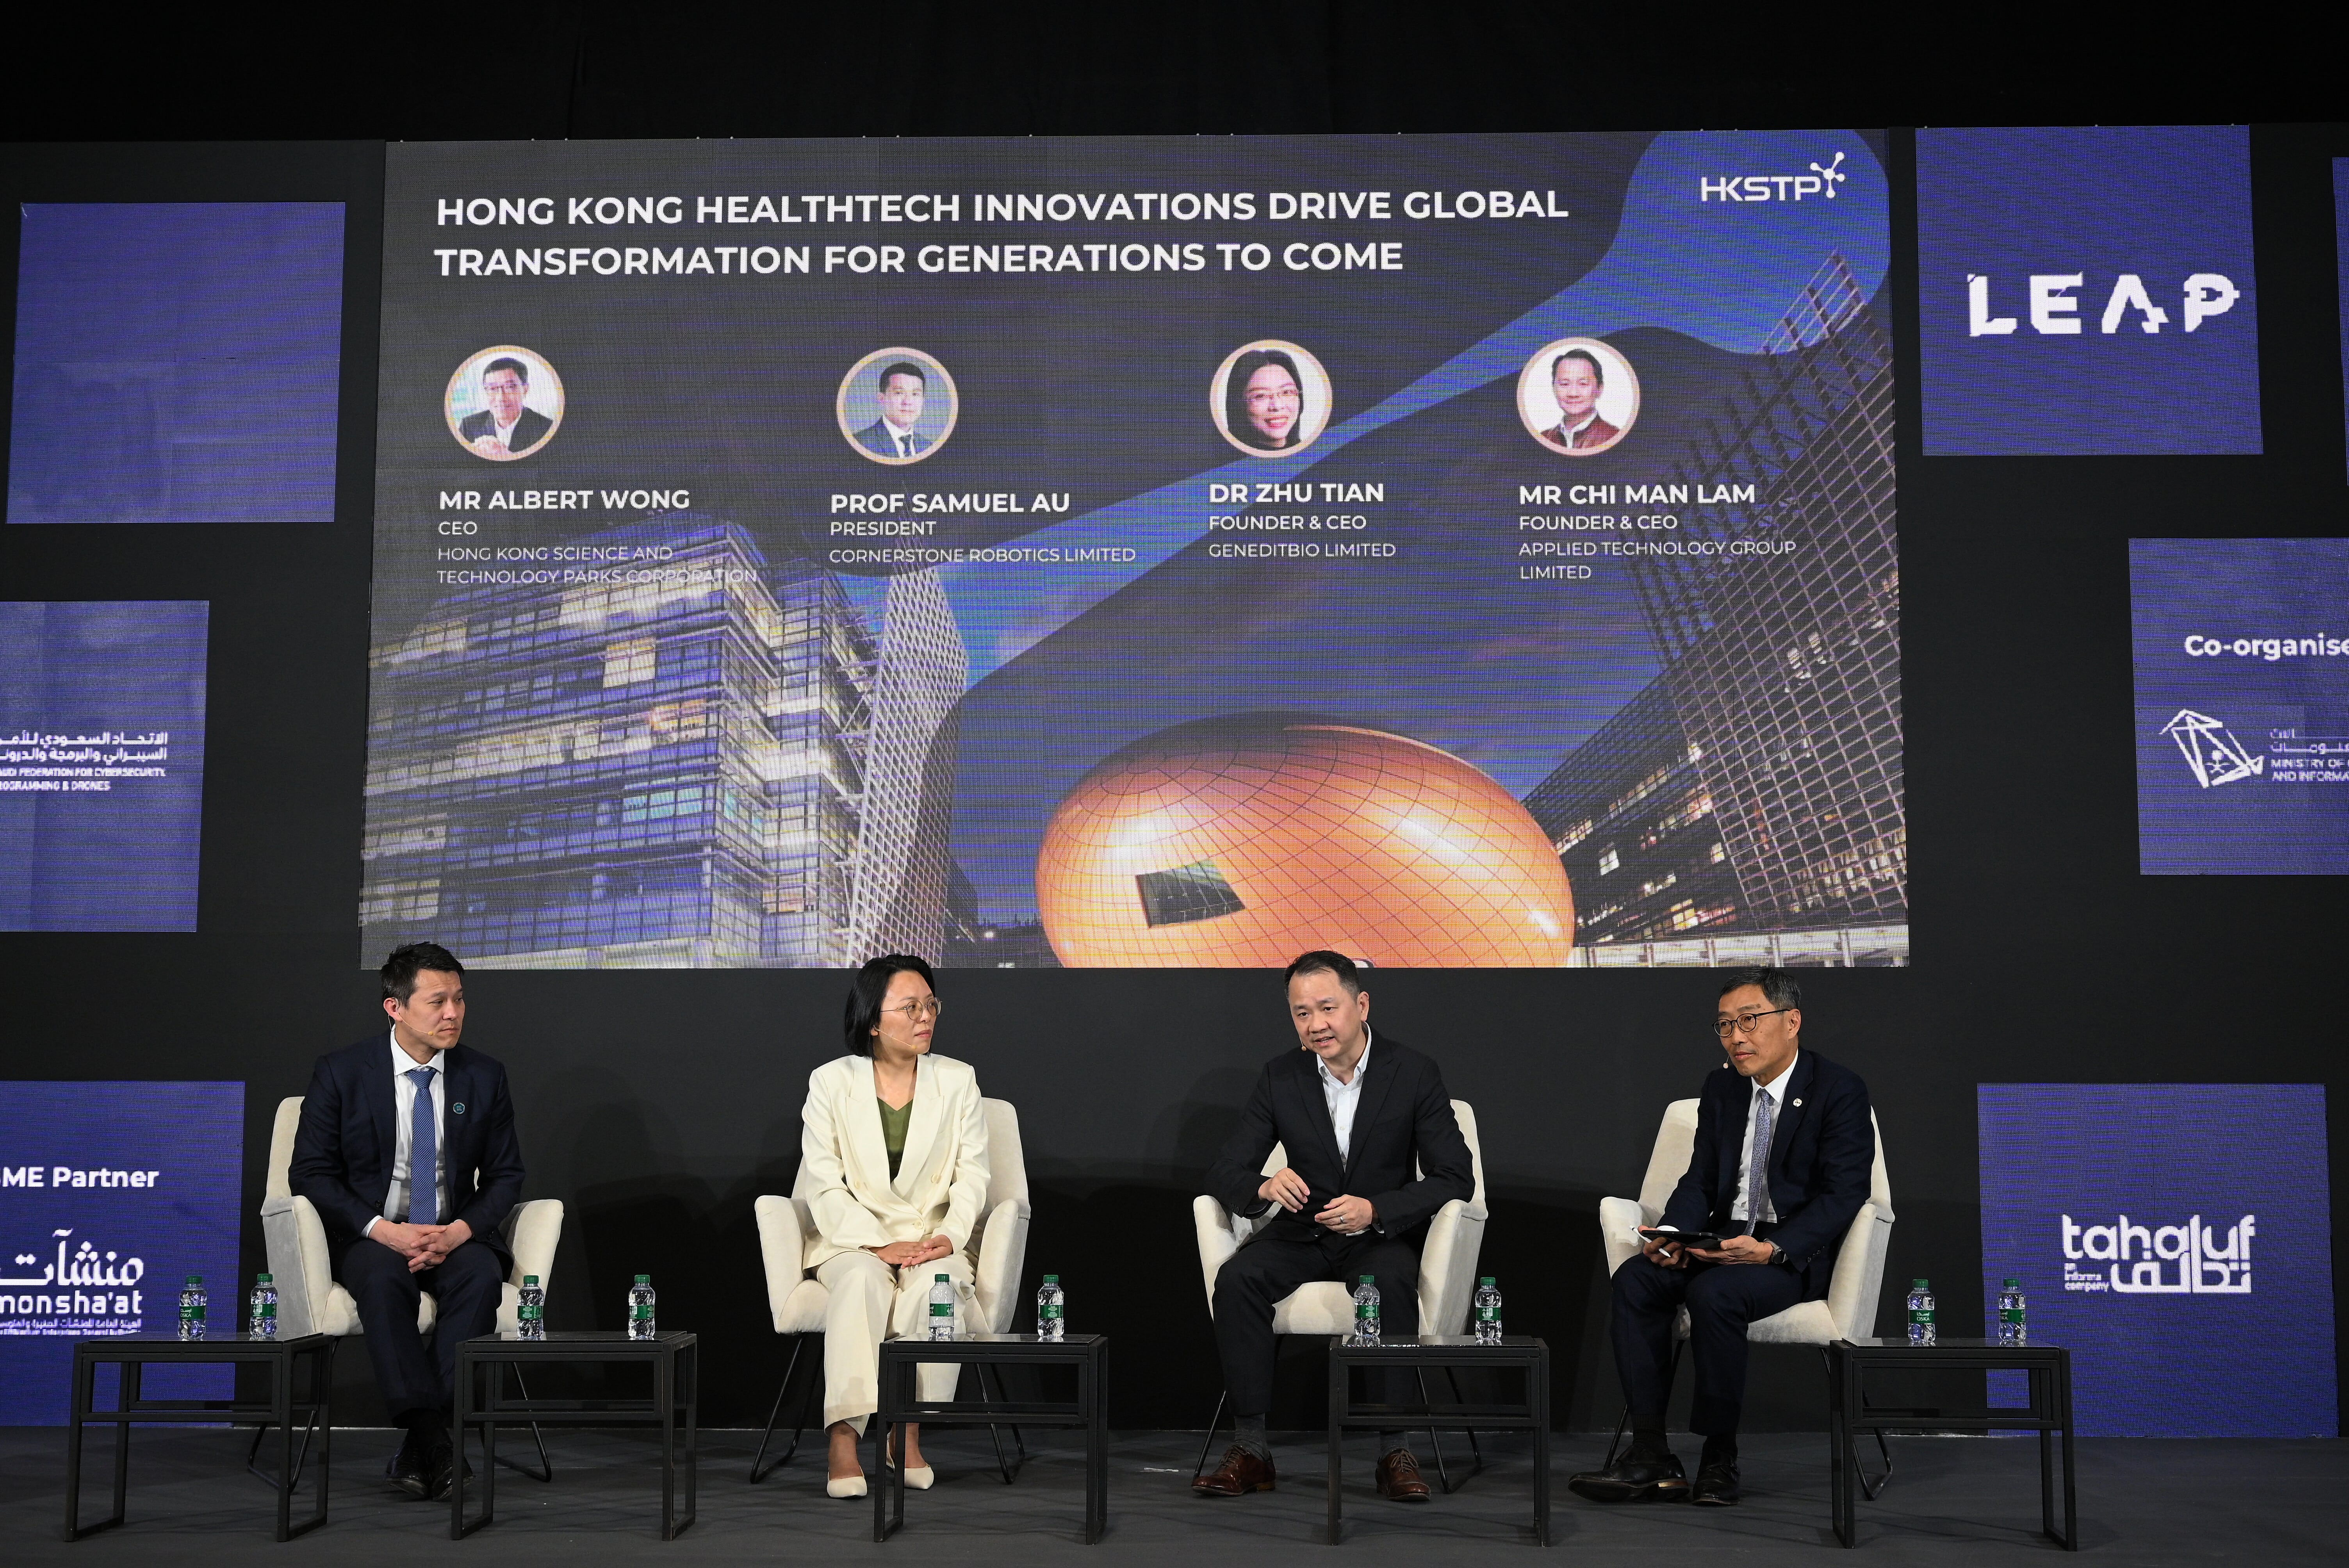 Titled “Hong Kong Healthtech Innovations Driving Global Transformation for Generations to Come”, the HKSTP-hosted panel discussion offered unique insights from robotics expert Professor Samuel Au, President of Cornerstone Robotics (first from left); Information and Communications Technology veteran Mr Chi Man Lam, Founder and CEO of Applied Technology Group (second from right); and passionate drug hunter Dr Zhu Tian, Co-Founder and CEO of GenEditBio (second from left).